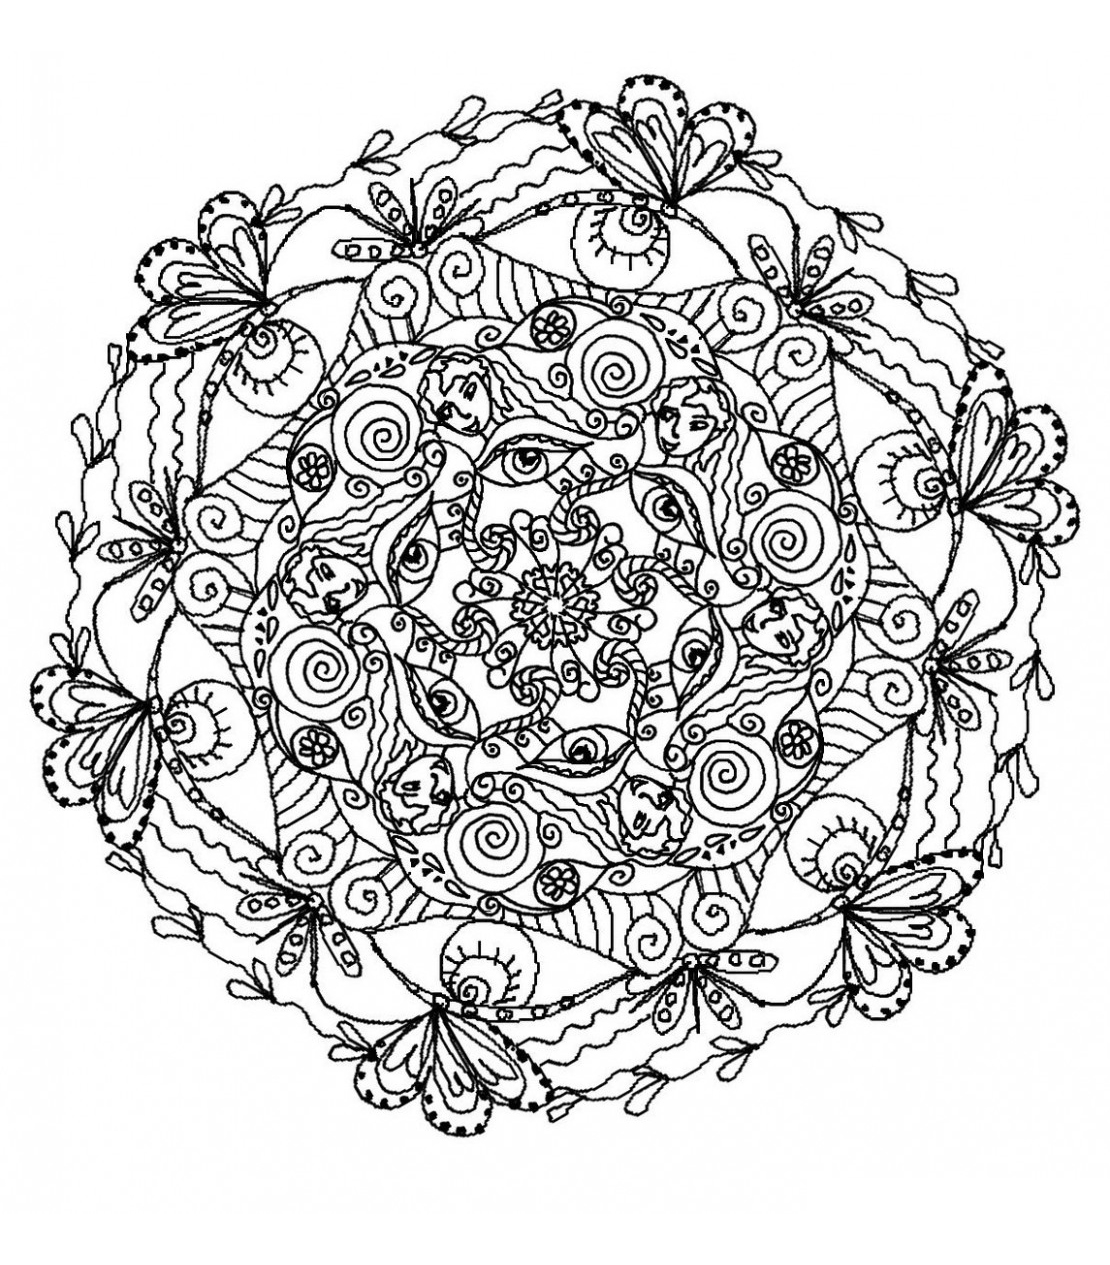 Mandala to color difficult 20   Difficult Mandalas for adults ...